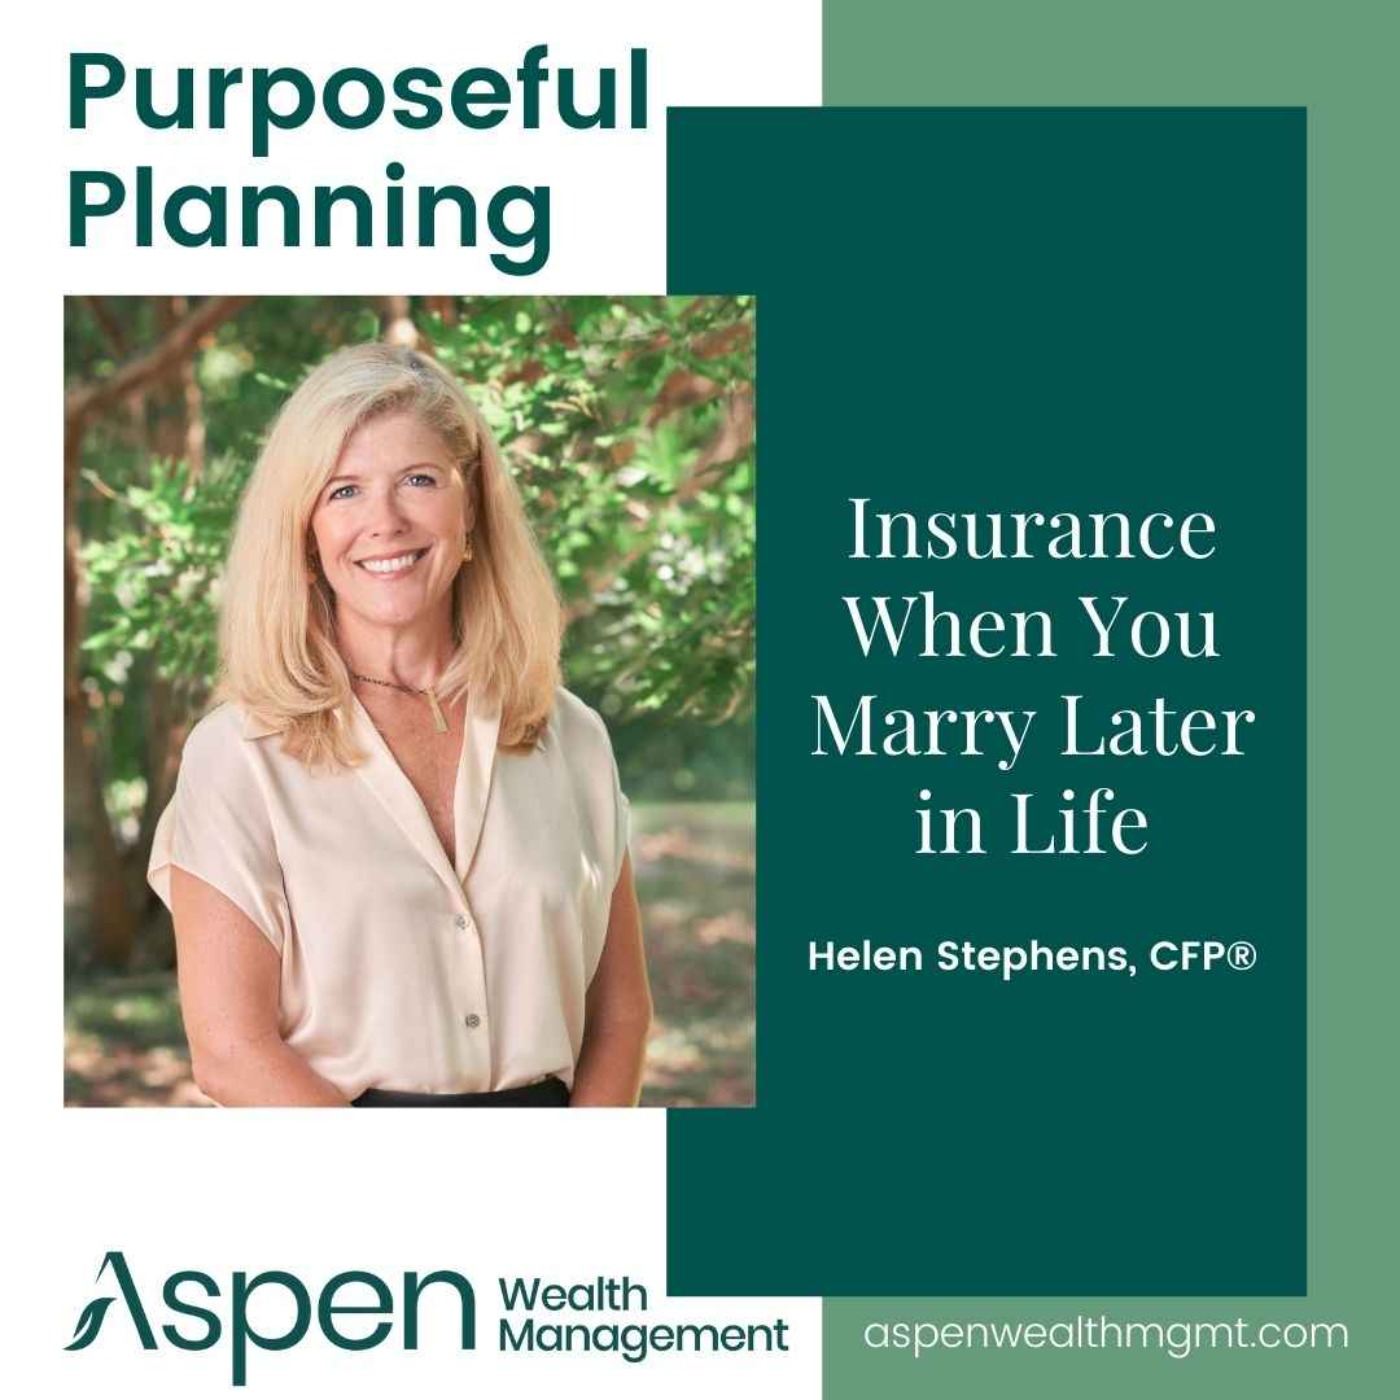 Insurance When Marrying Later in Life, Part 1